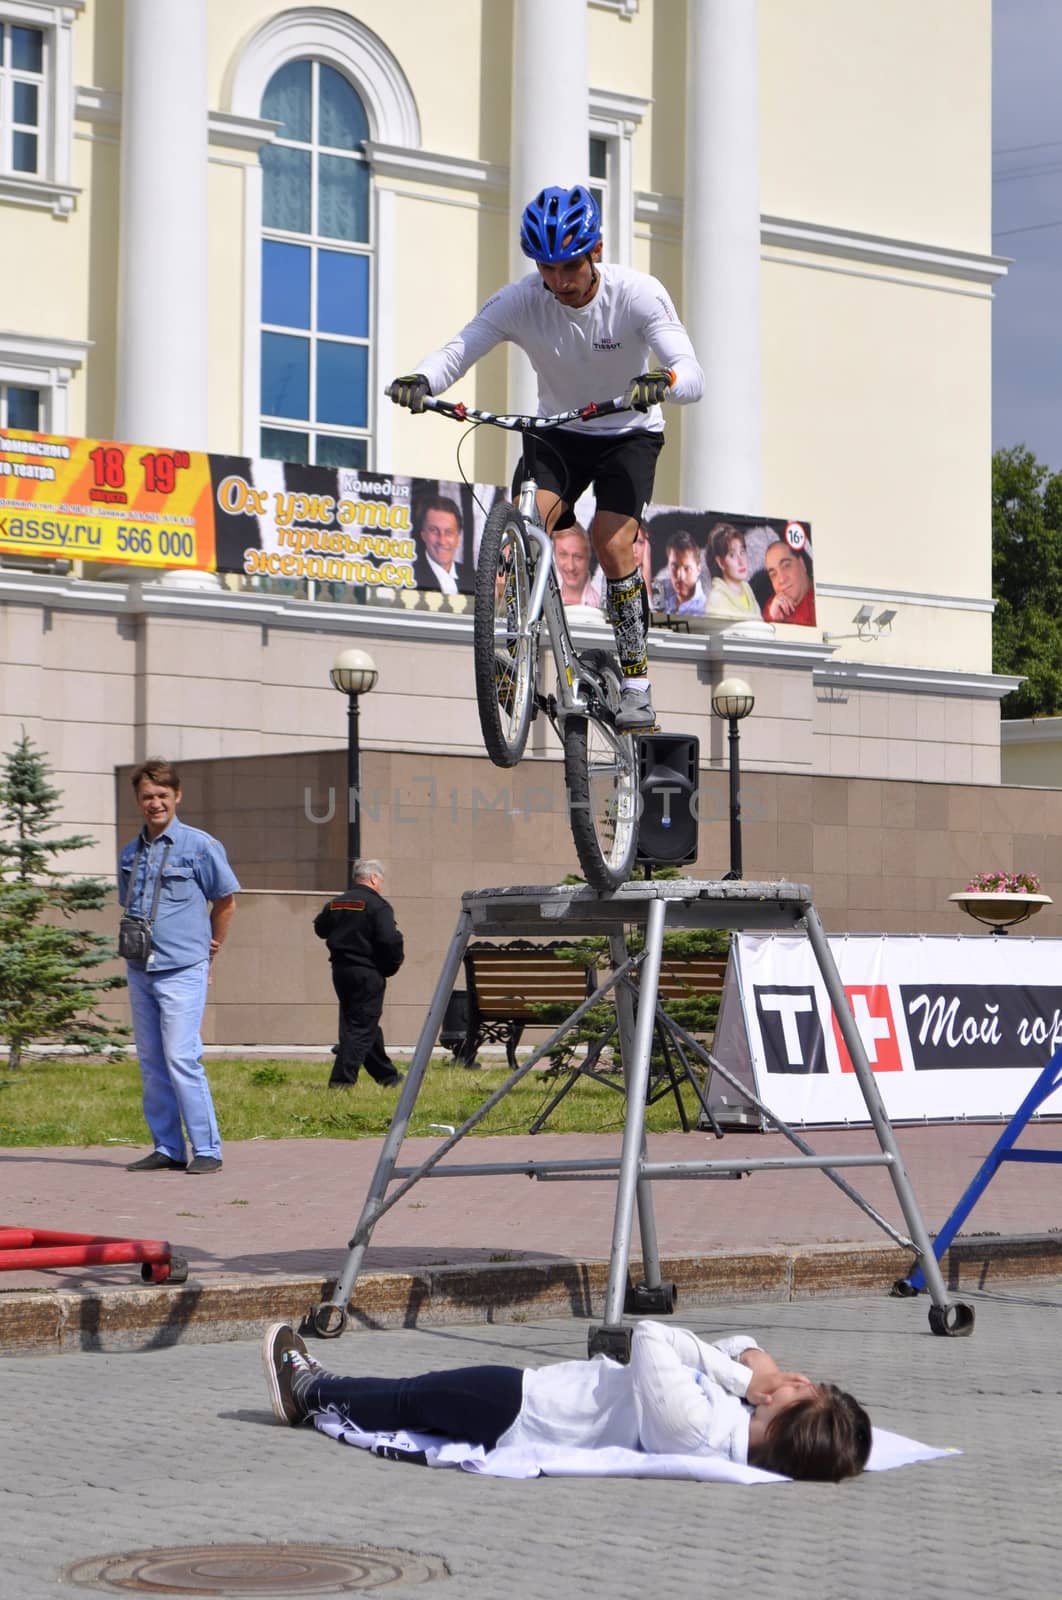 Timur Ibragimov performance, champions of Russia on a cycle tria by veronka72